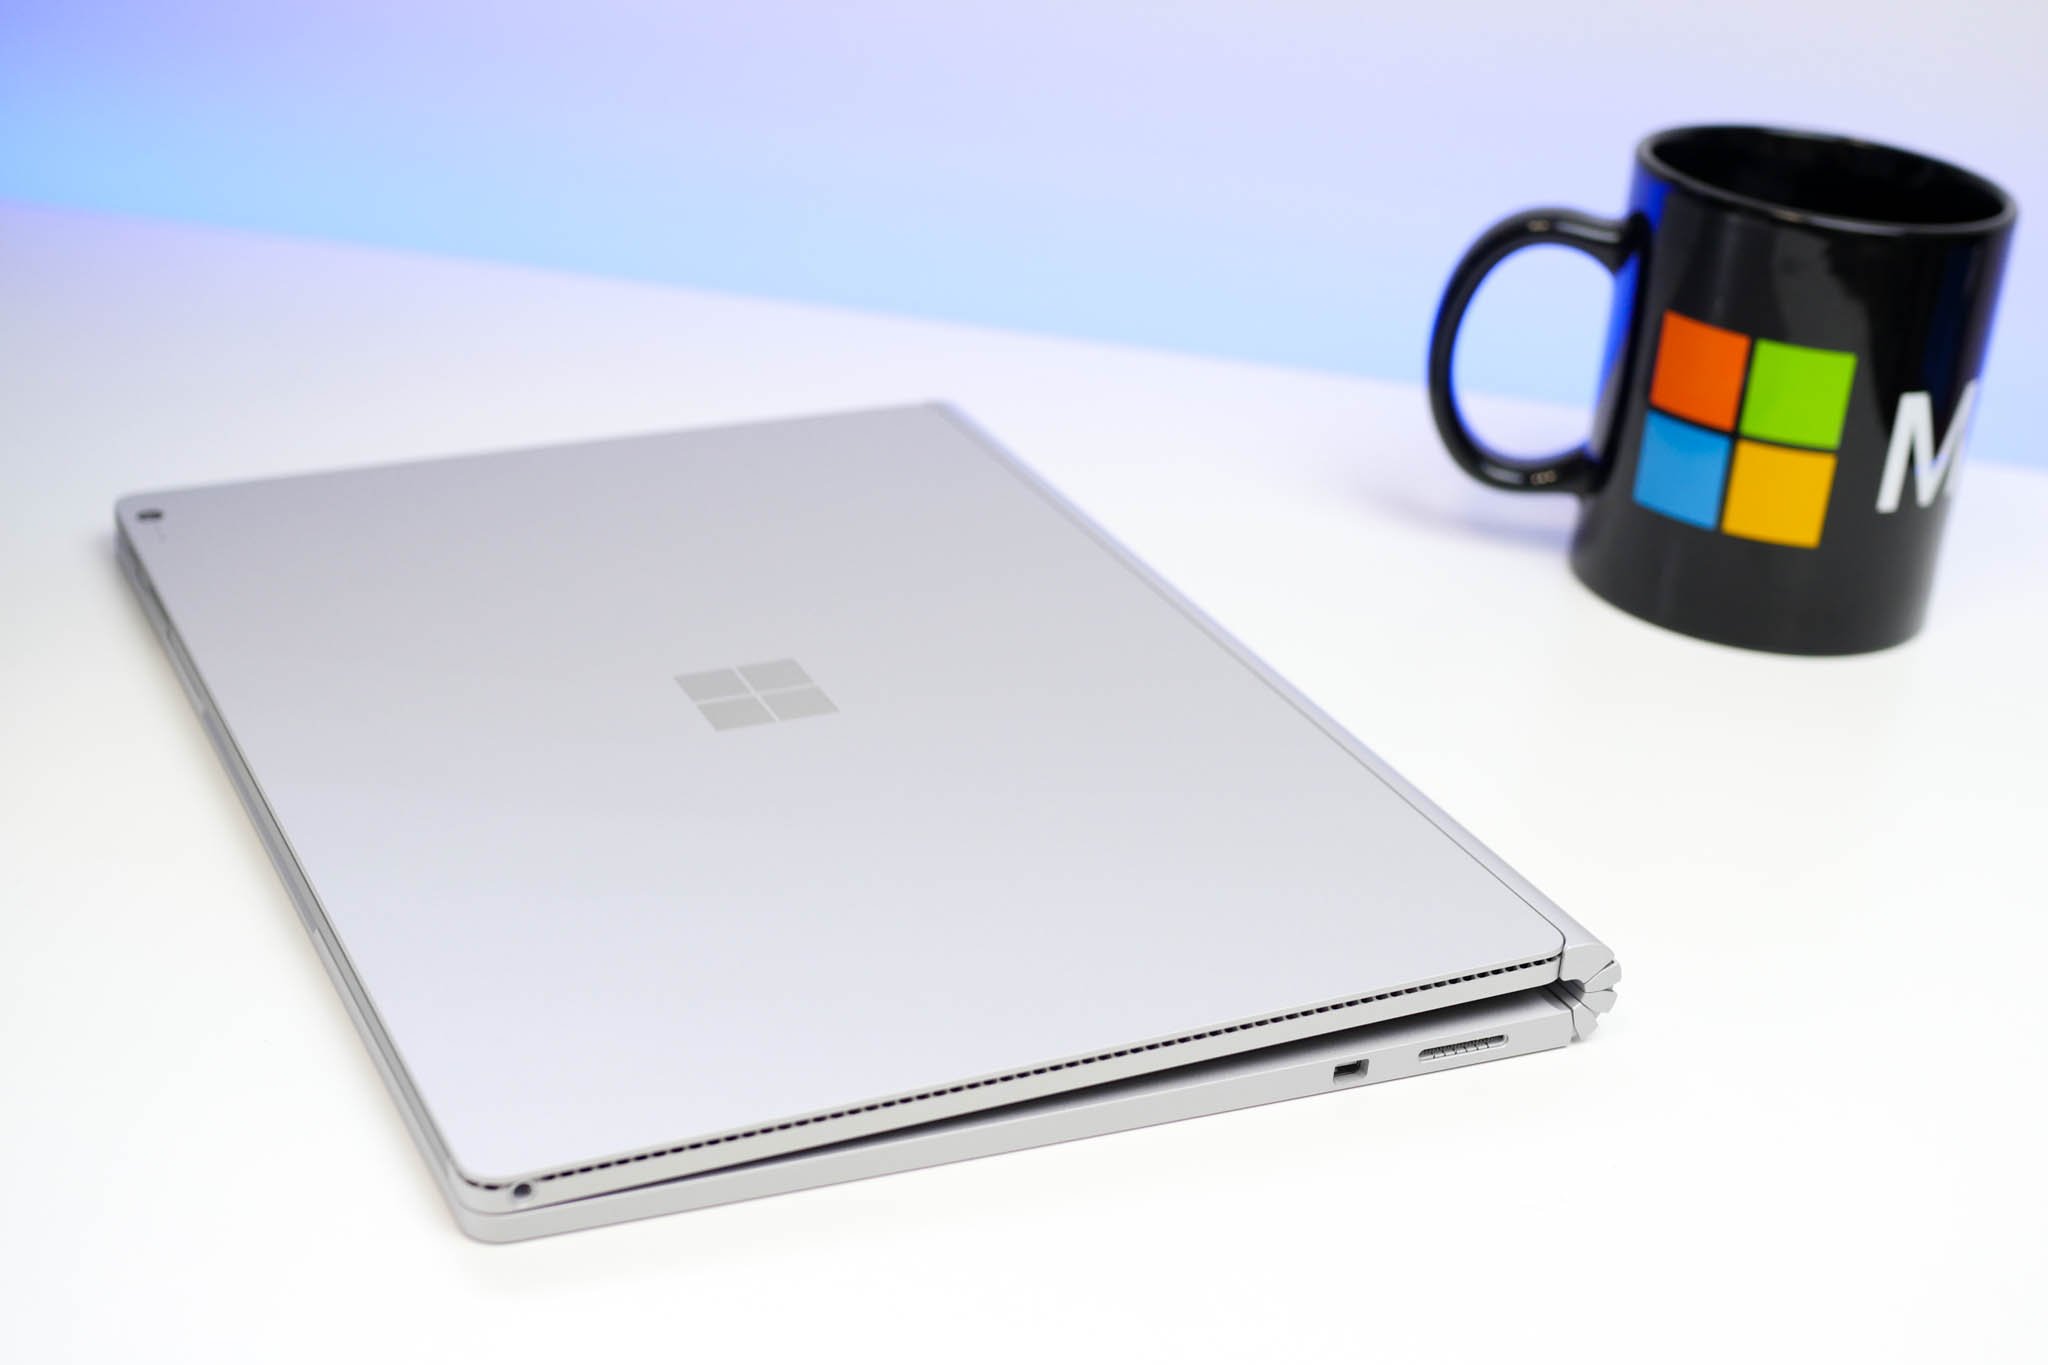 New Surface Book configuration with Core i5 and 512GB of storage up for pre-order